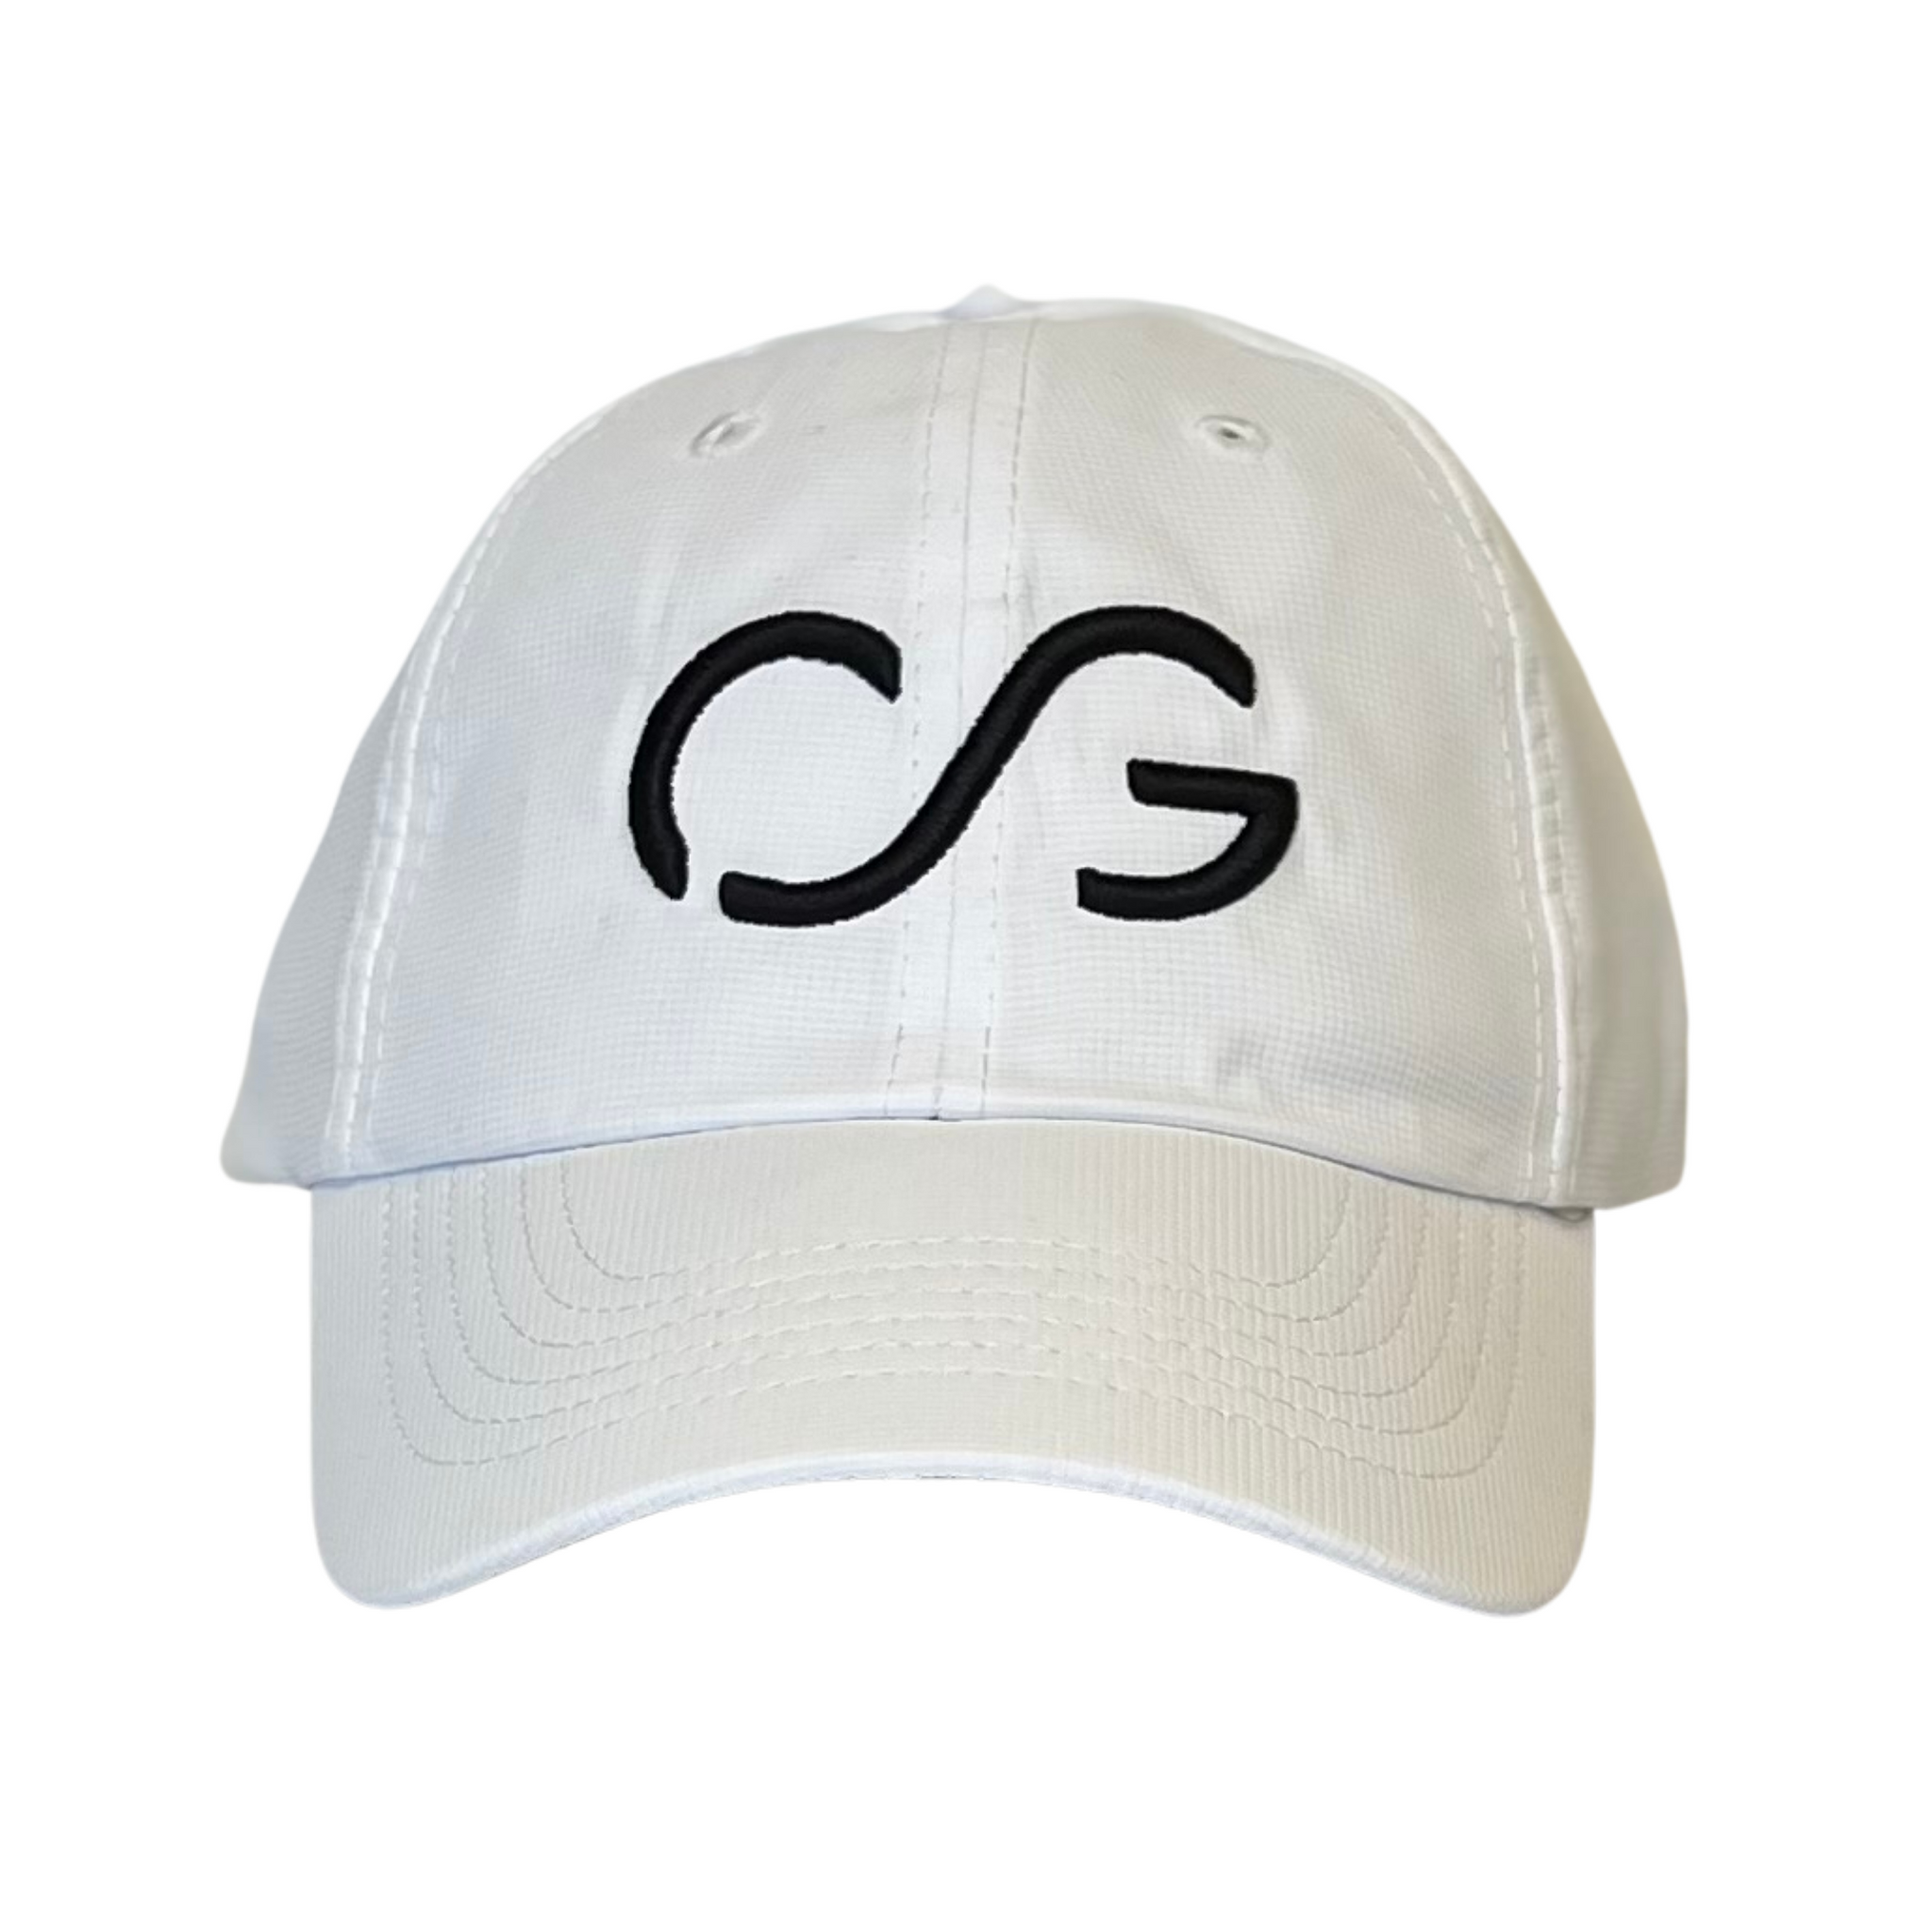 Performance hat -White with Black 3D embroidery CG